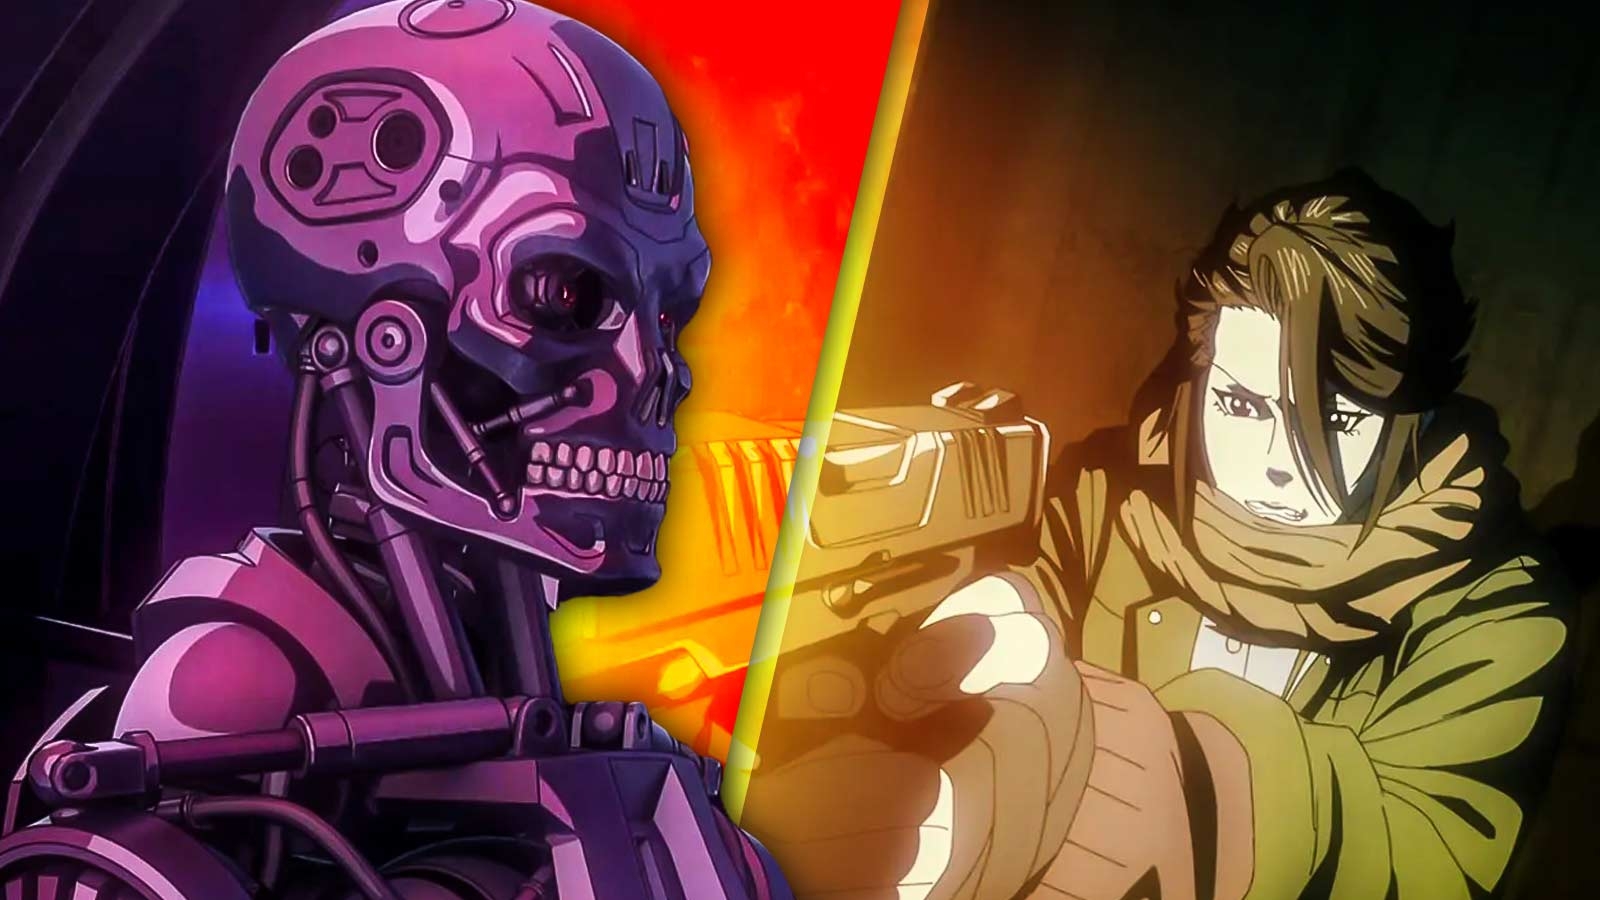 ’Terminator Zero’ Turns Into a Samurai Story With Robots After Creator’s Misconception Landed Him in a Hilarious Pickle